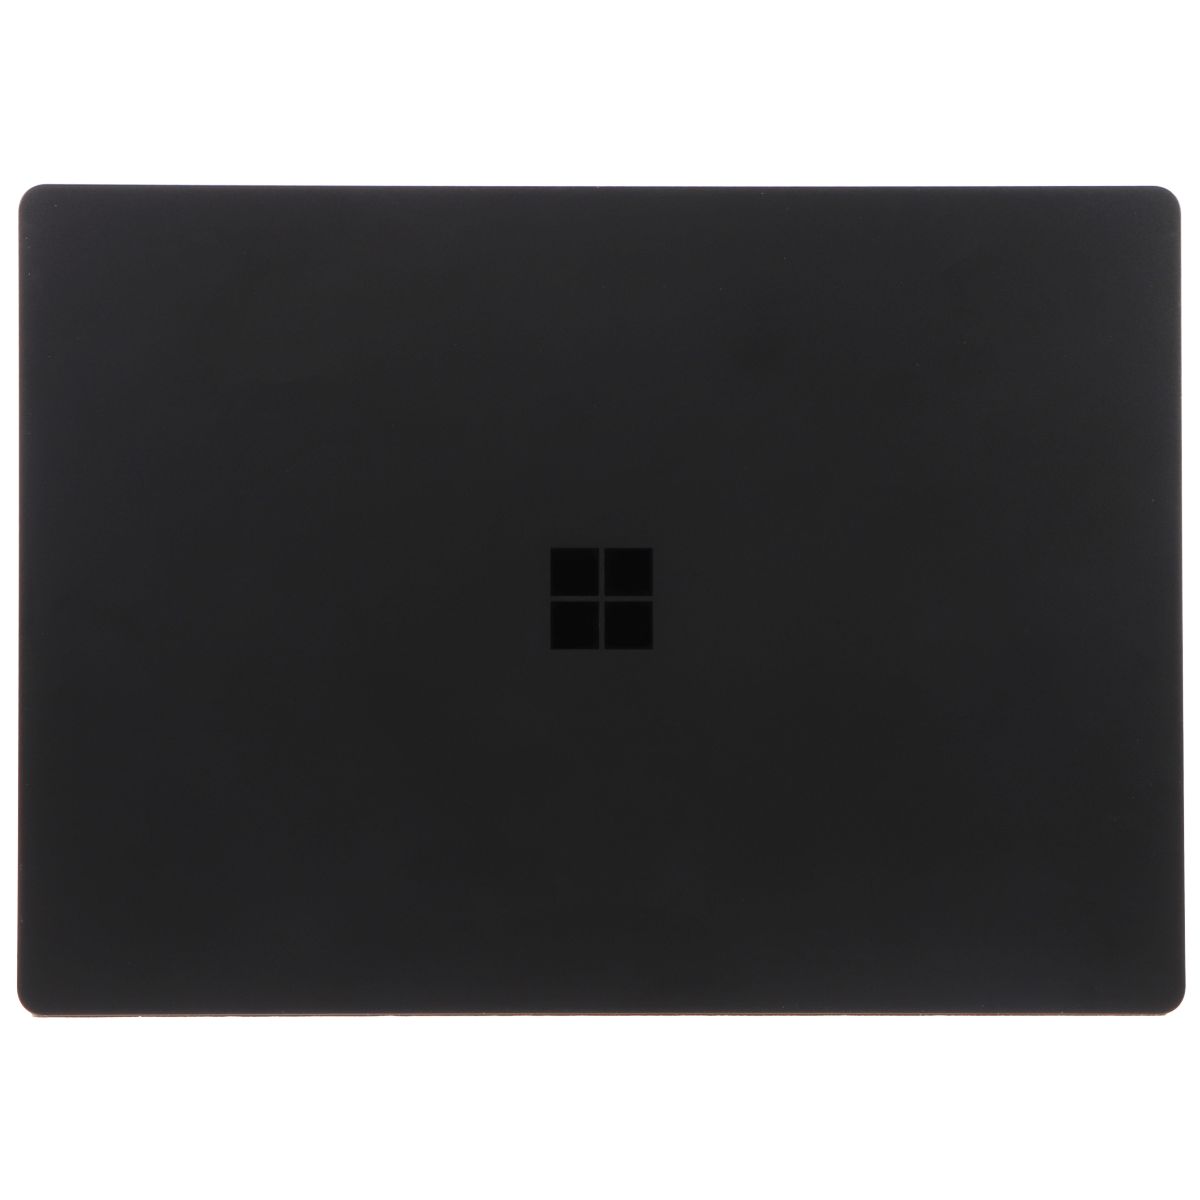 Microsoft Surface Laptop 4 (15-in) 1979 (i7-1185G7 / 1TB SSD / 32GB) - Black Laptops - PC Laptops & Netbooks Microsoft    - Simple Cell Bulk Wholesale Pricing - USA Seller